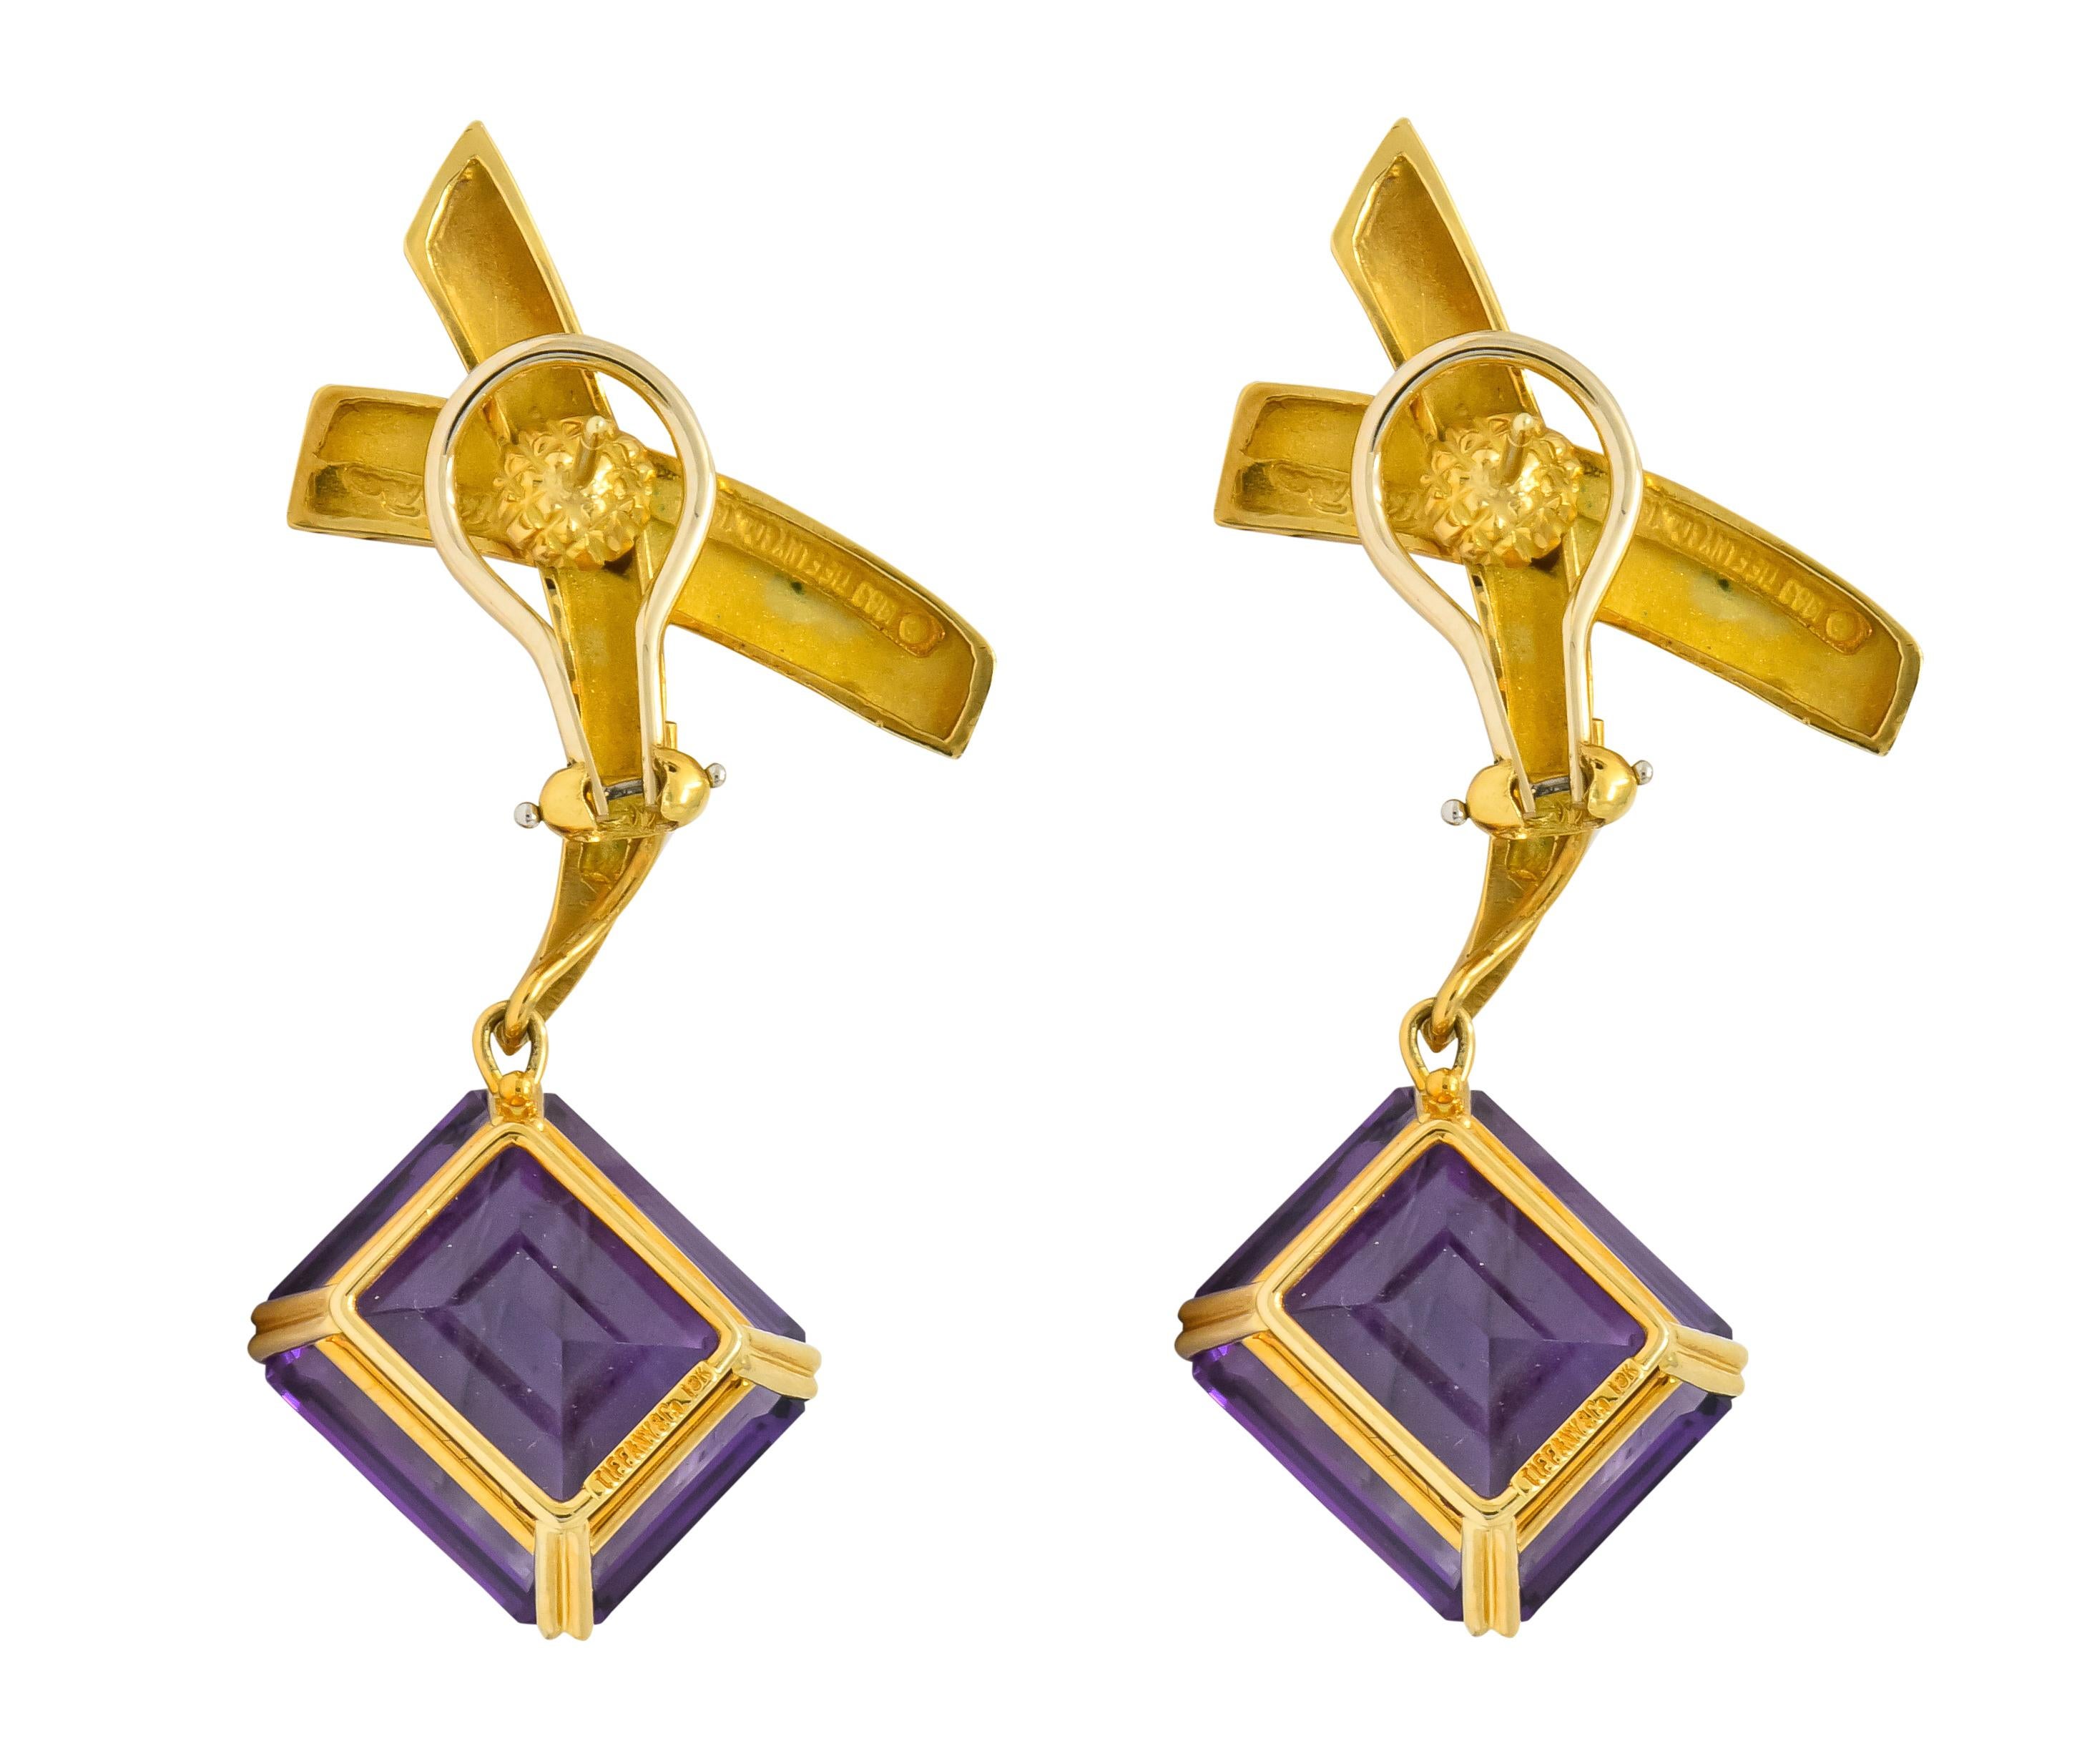 Designed as a stylized gold 'X' suspending an articulated basket set amethyst drop

Amethysts are emerald cut and an incredibly well-matched purple color, weighing 32.00 carats total

Each amethyst drop is removable from X surmount

Completed by